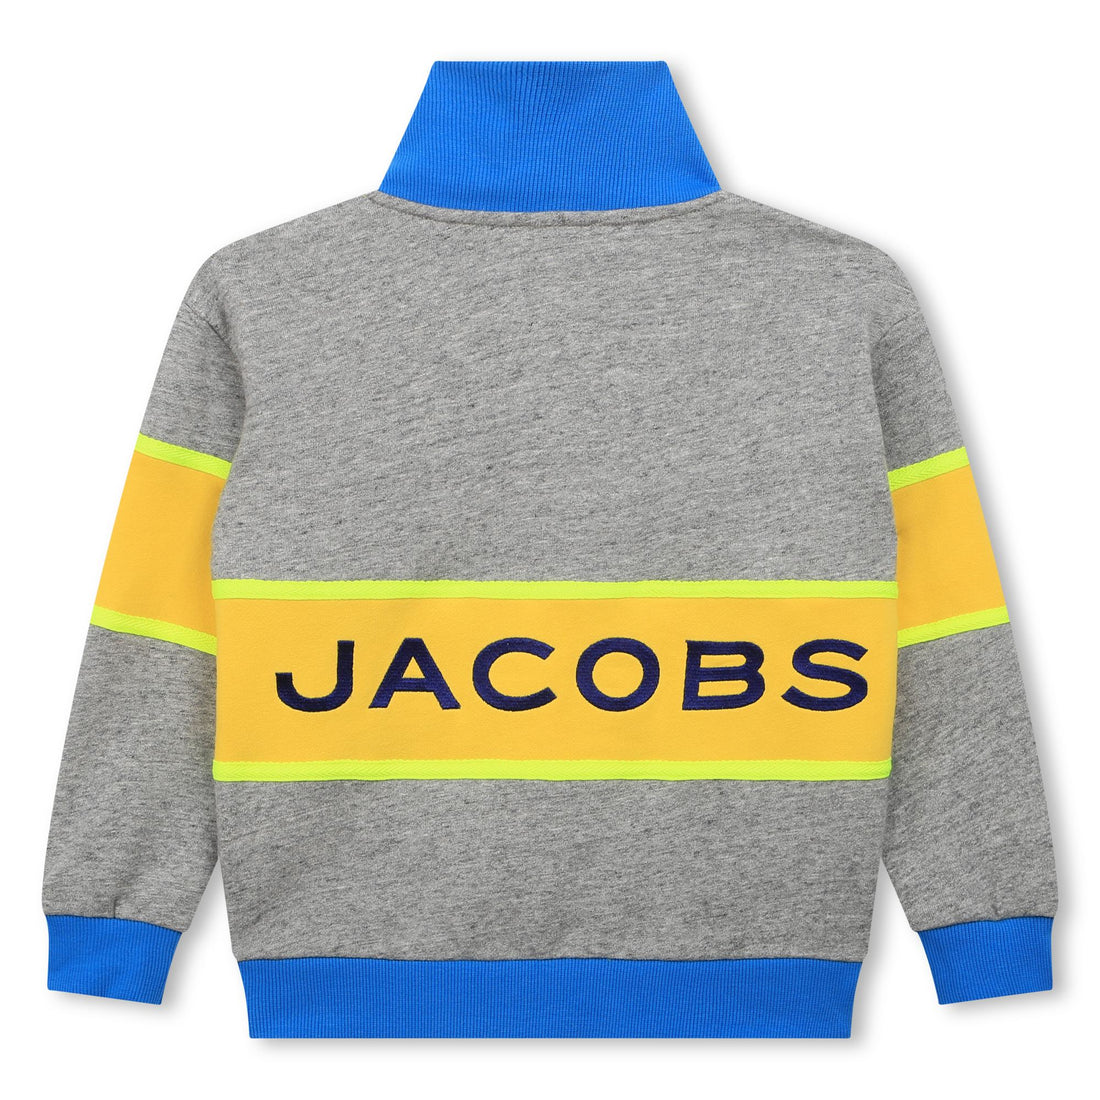 The Marc Jacobs Sweat Style: W25626